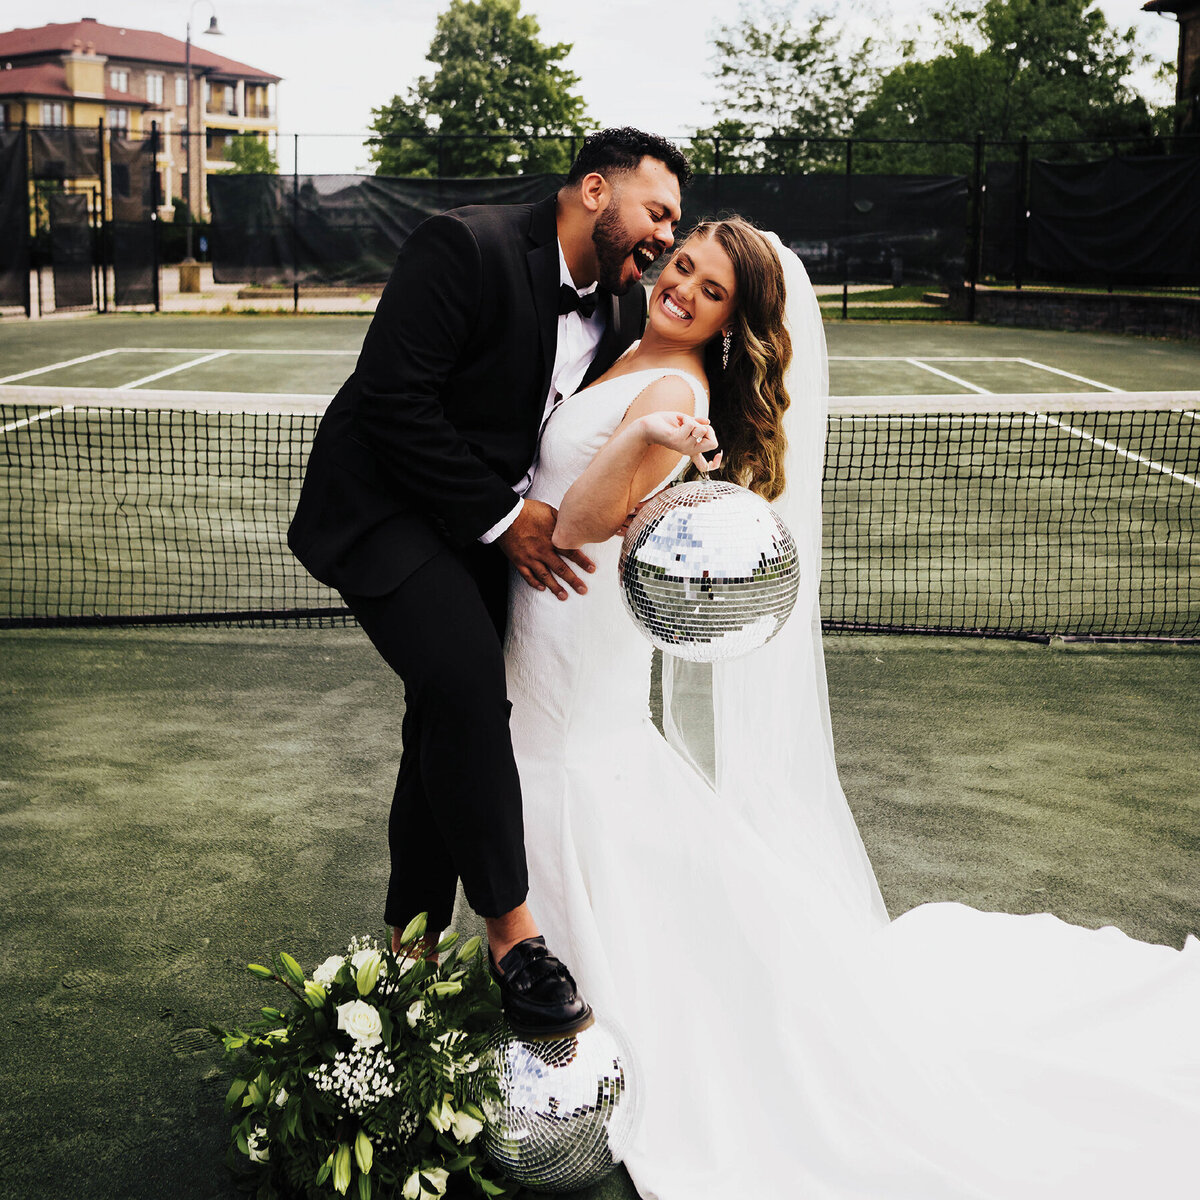 Bridge and groom on a tennis court with disco balls